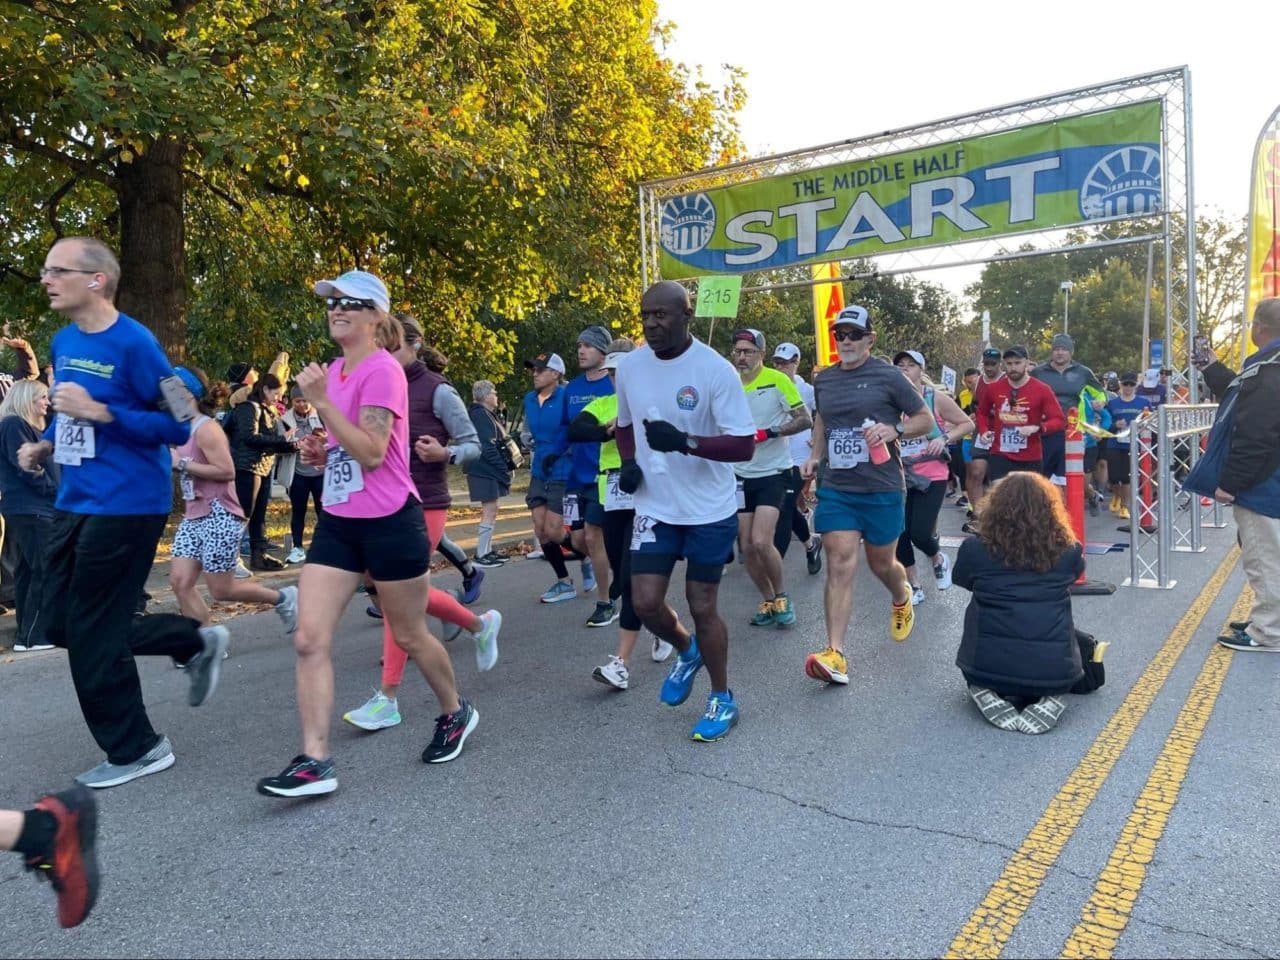 Finishing Strong at This Year’s Murfreesboro Middle Half - Lee Company